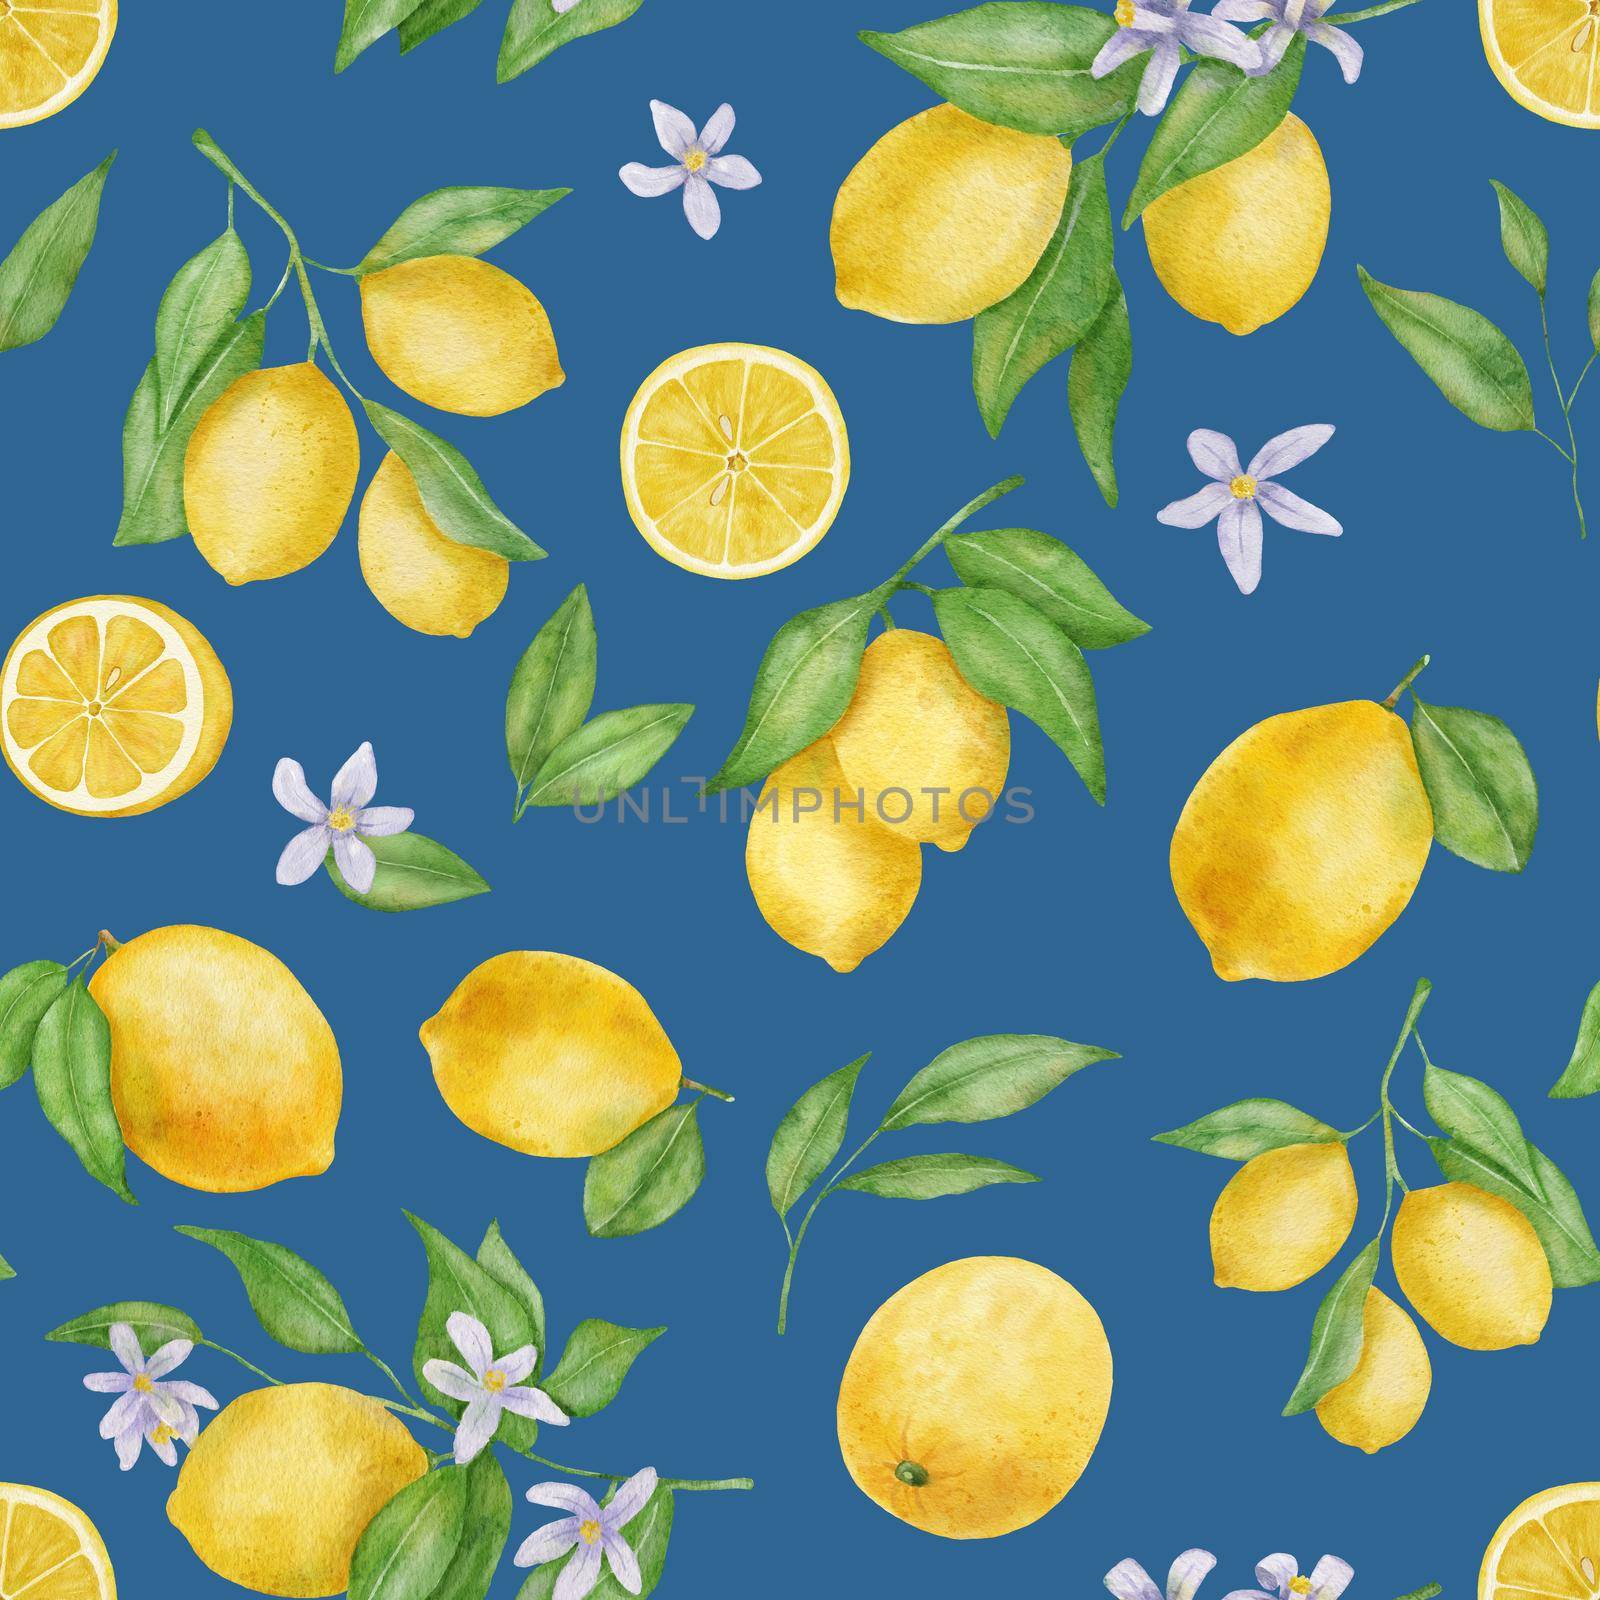 Lemon fruits with leaves and flower watercolor seamless pattern on blue background